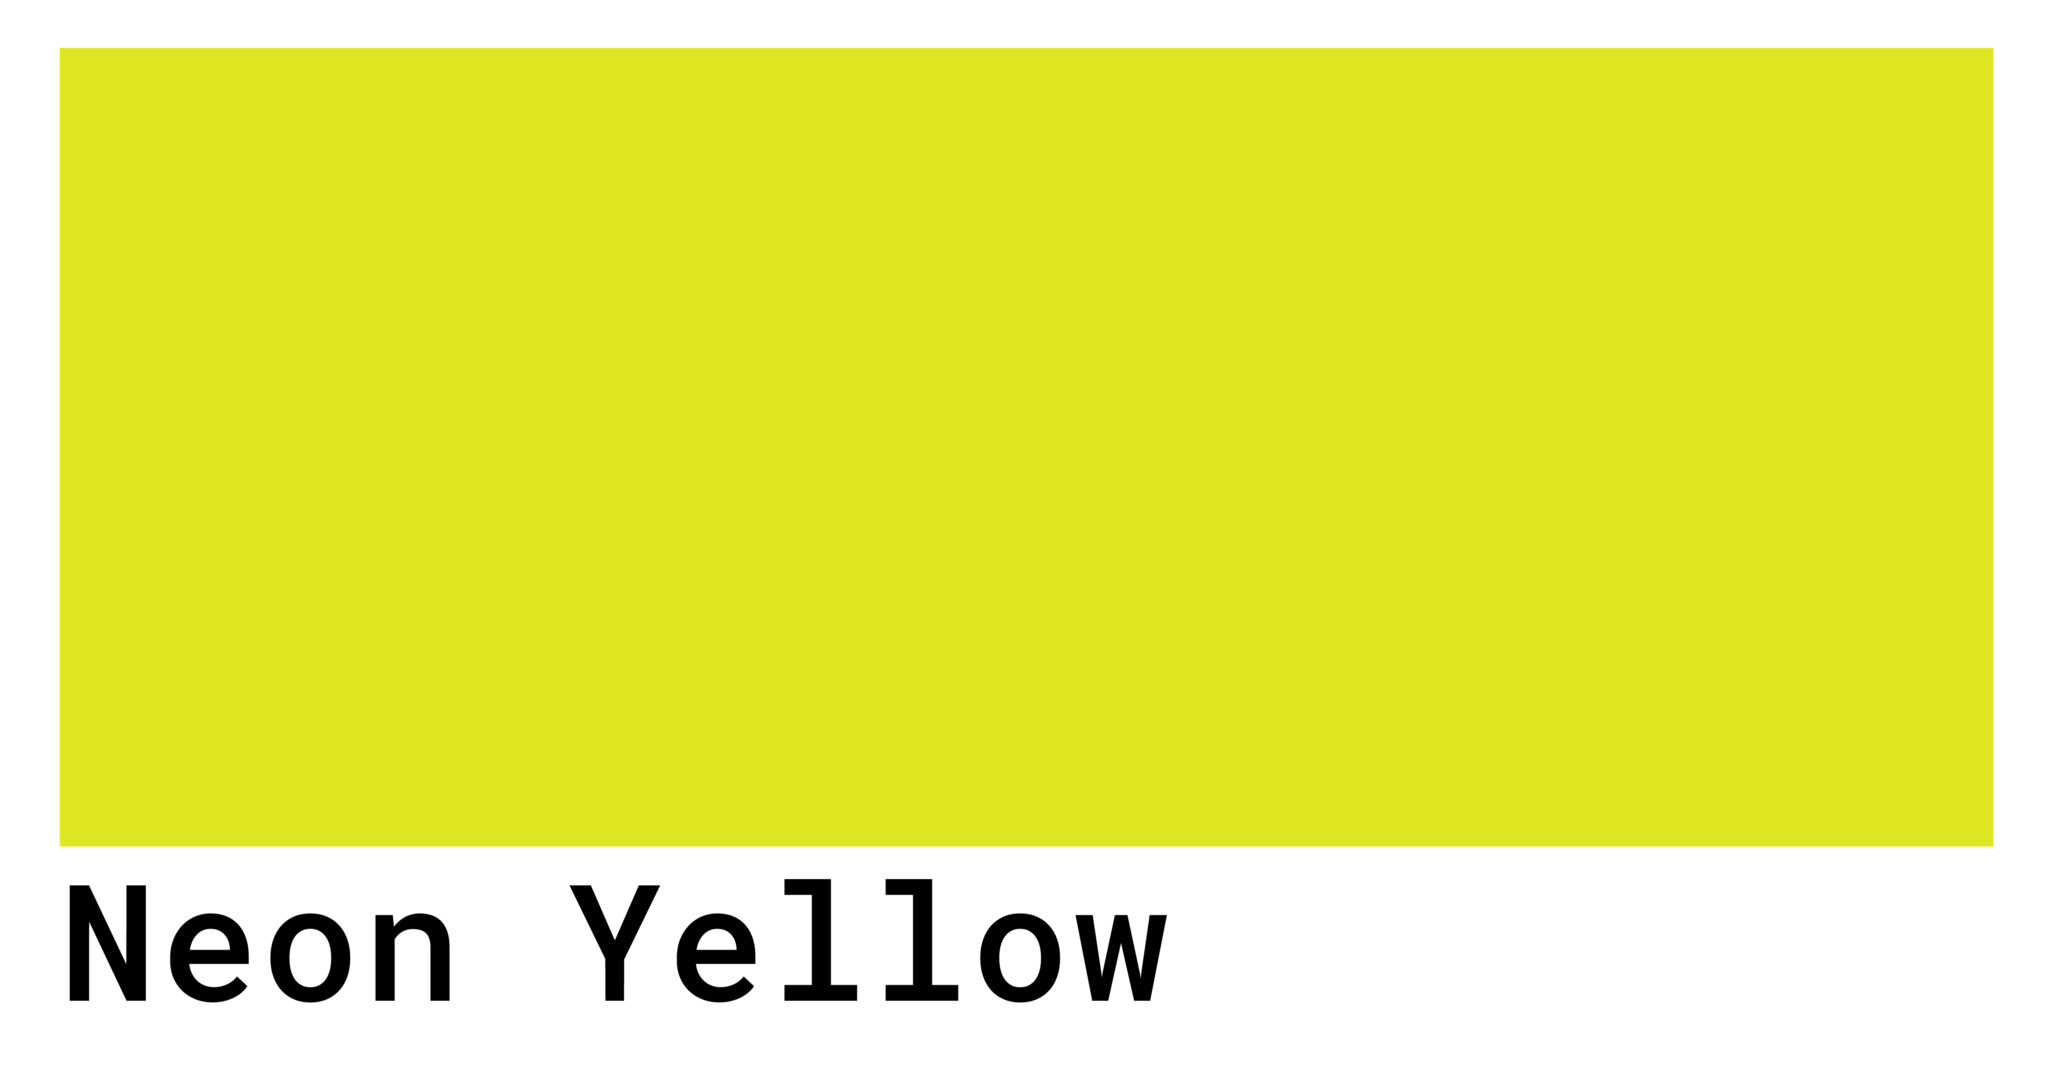 1. Neon Blue and Yellow Hair Dye - wide 4